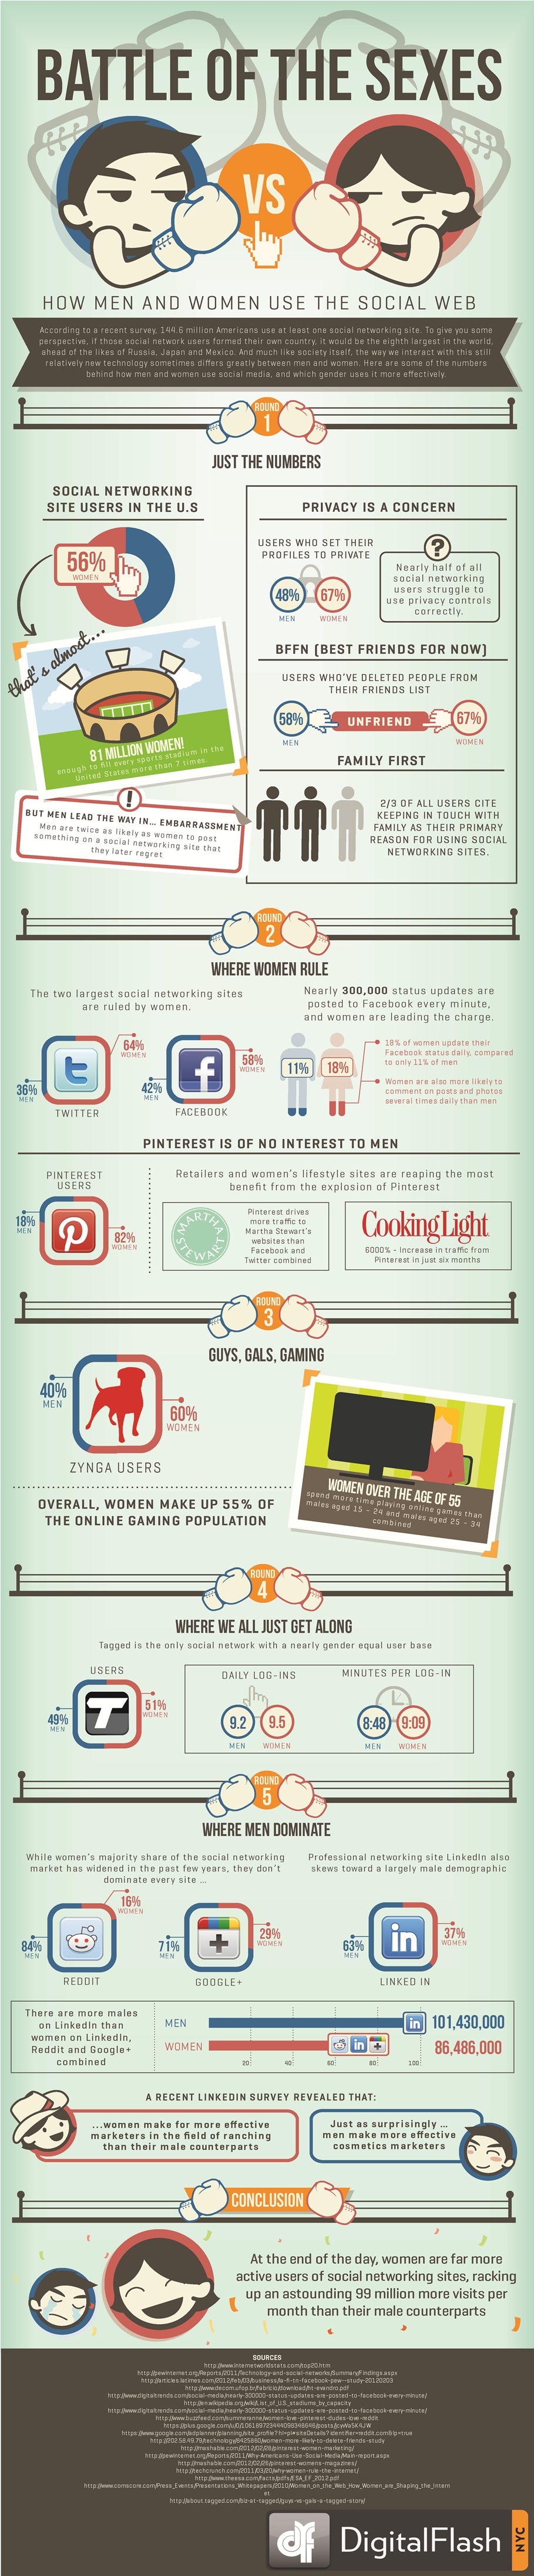 Social-Battle-Of-The-Sexes-infographic